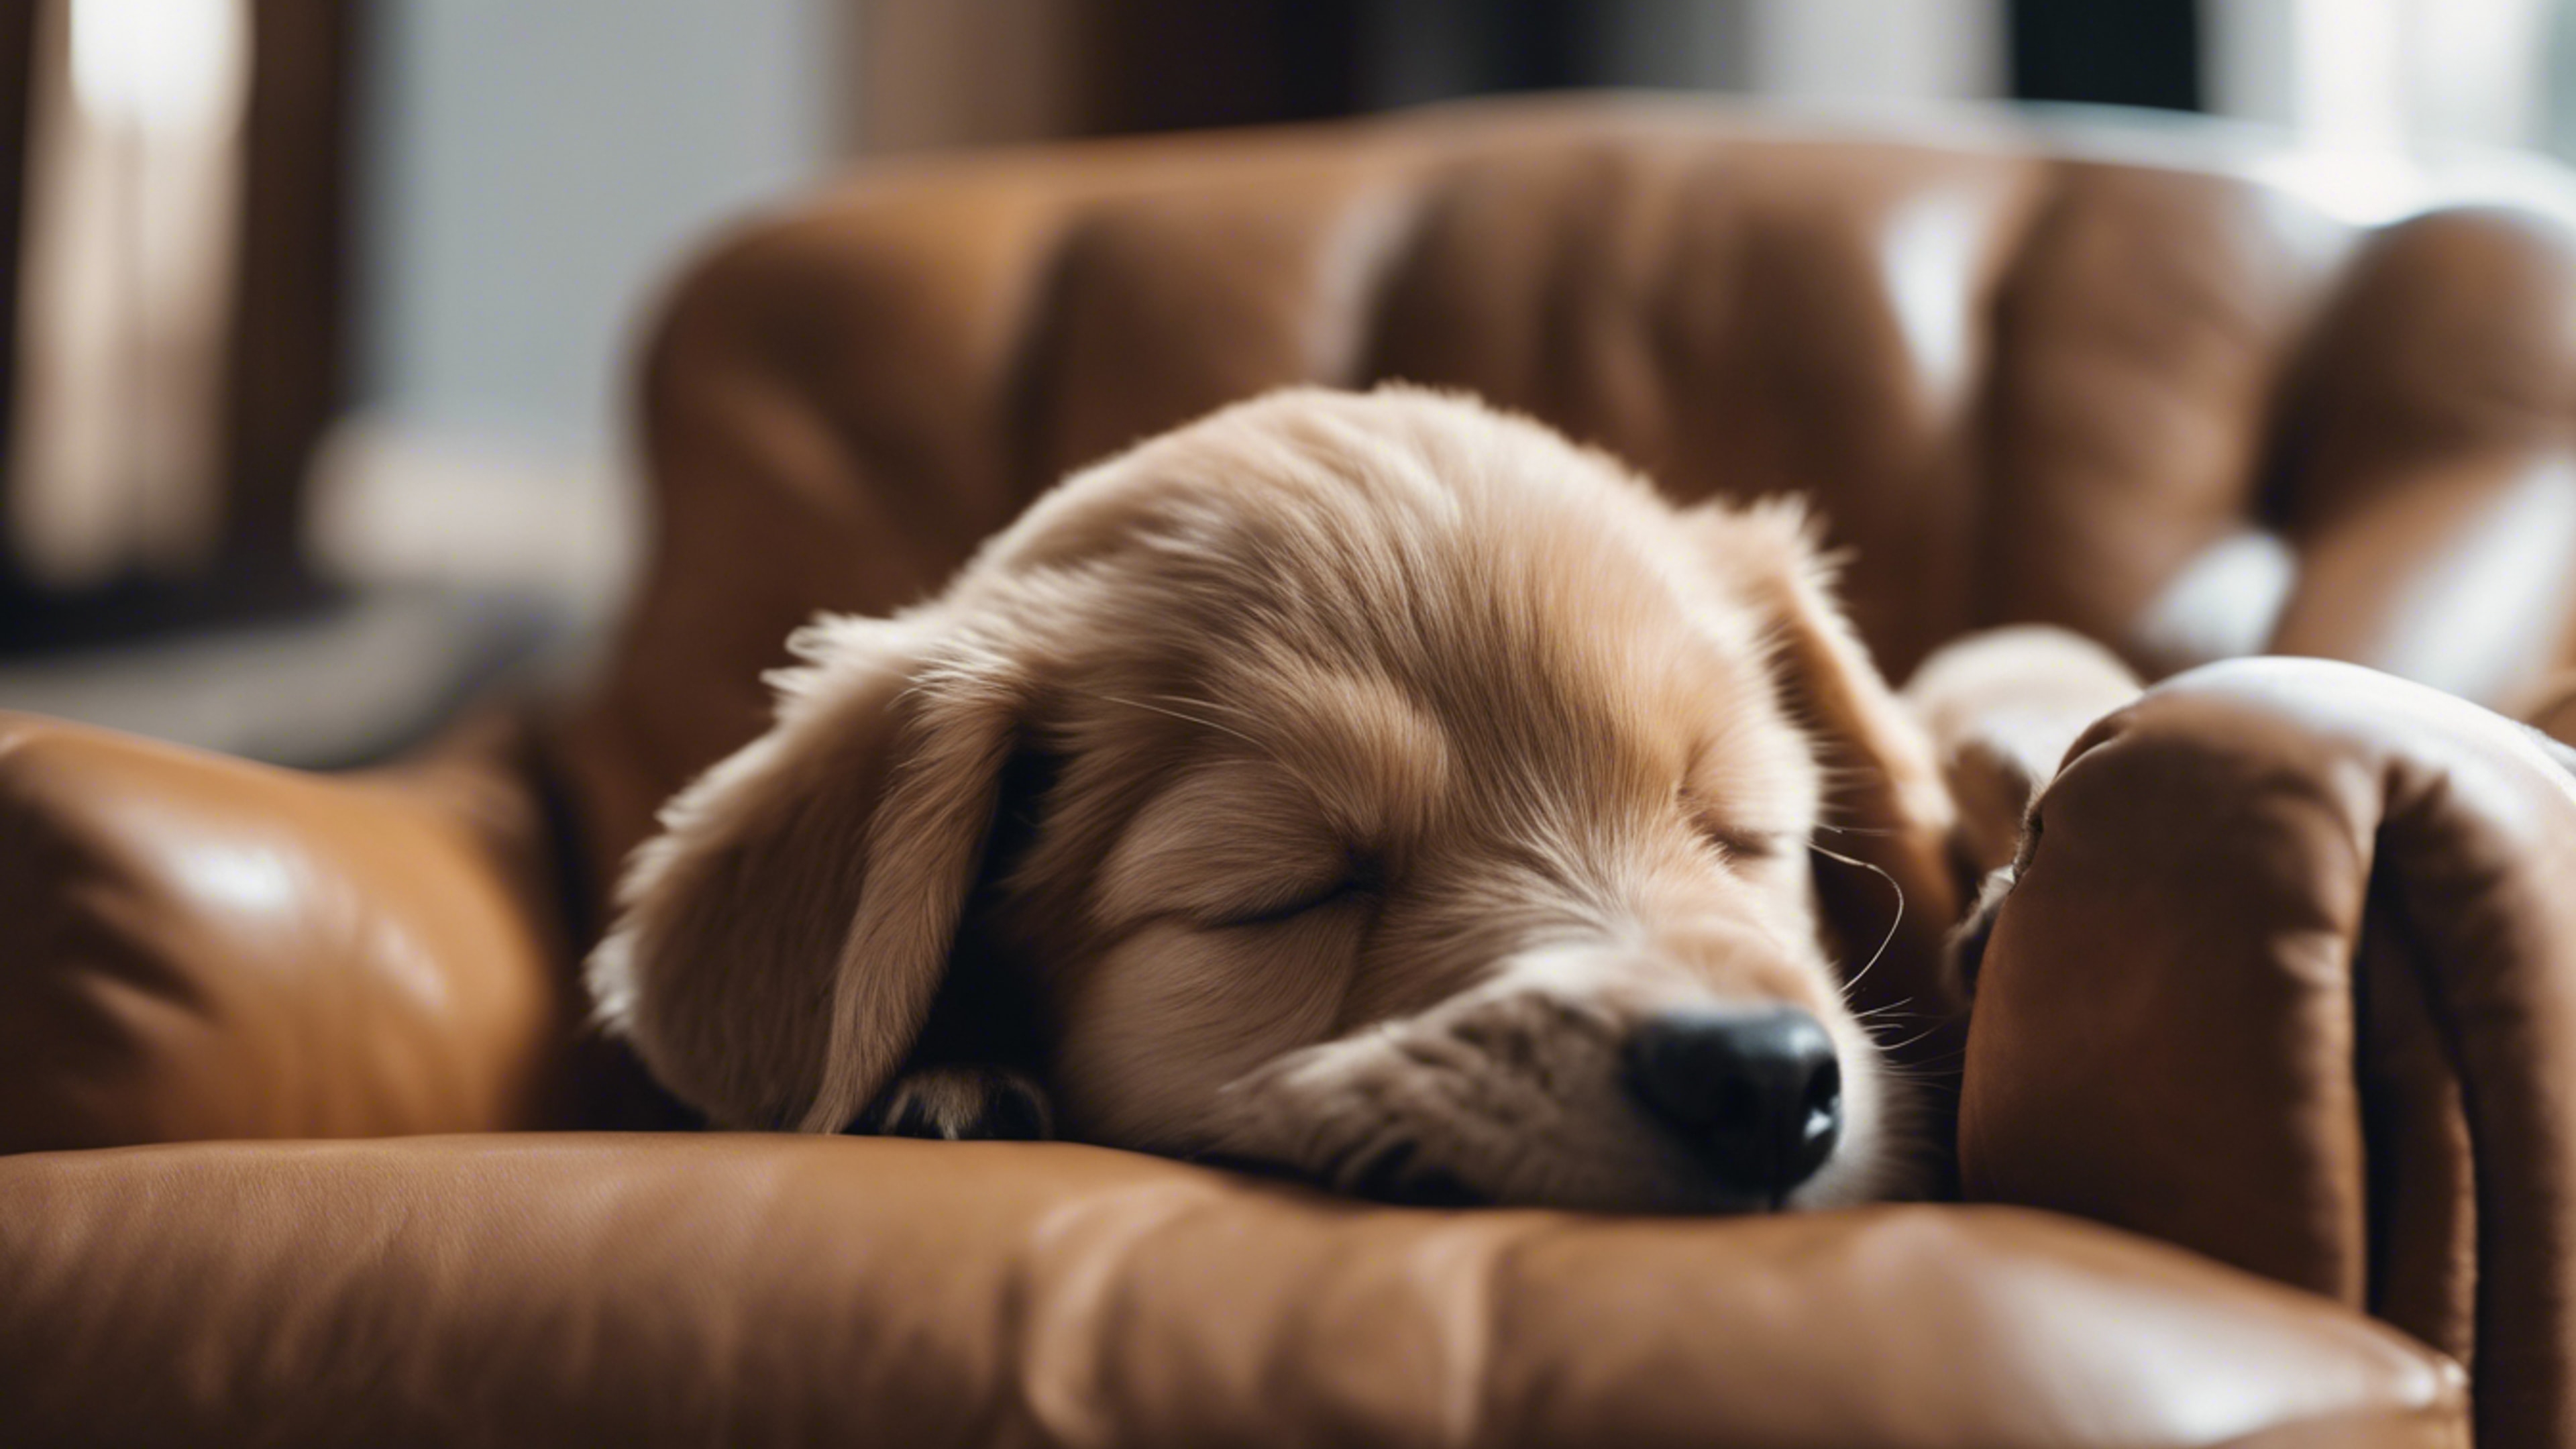 A cute puppy snoozing on a comfortable, oversized brown leather armchair. ផ្ទាំង​រូបភាព[9200ee1466b7462a9782]